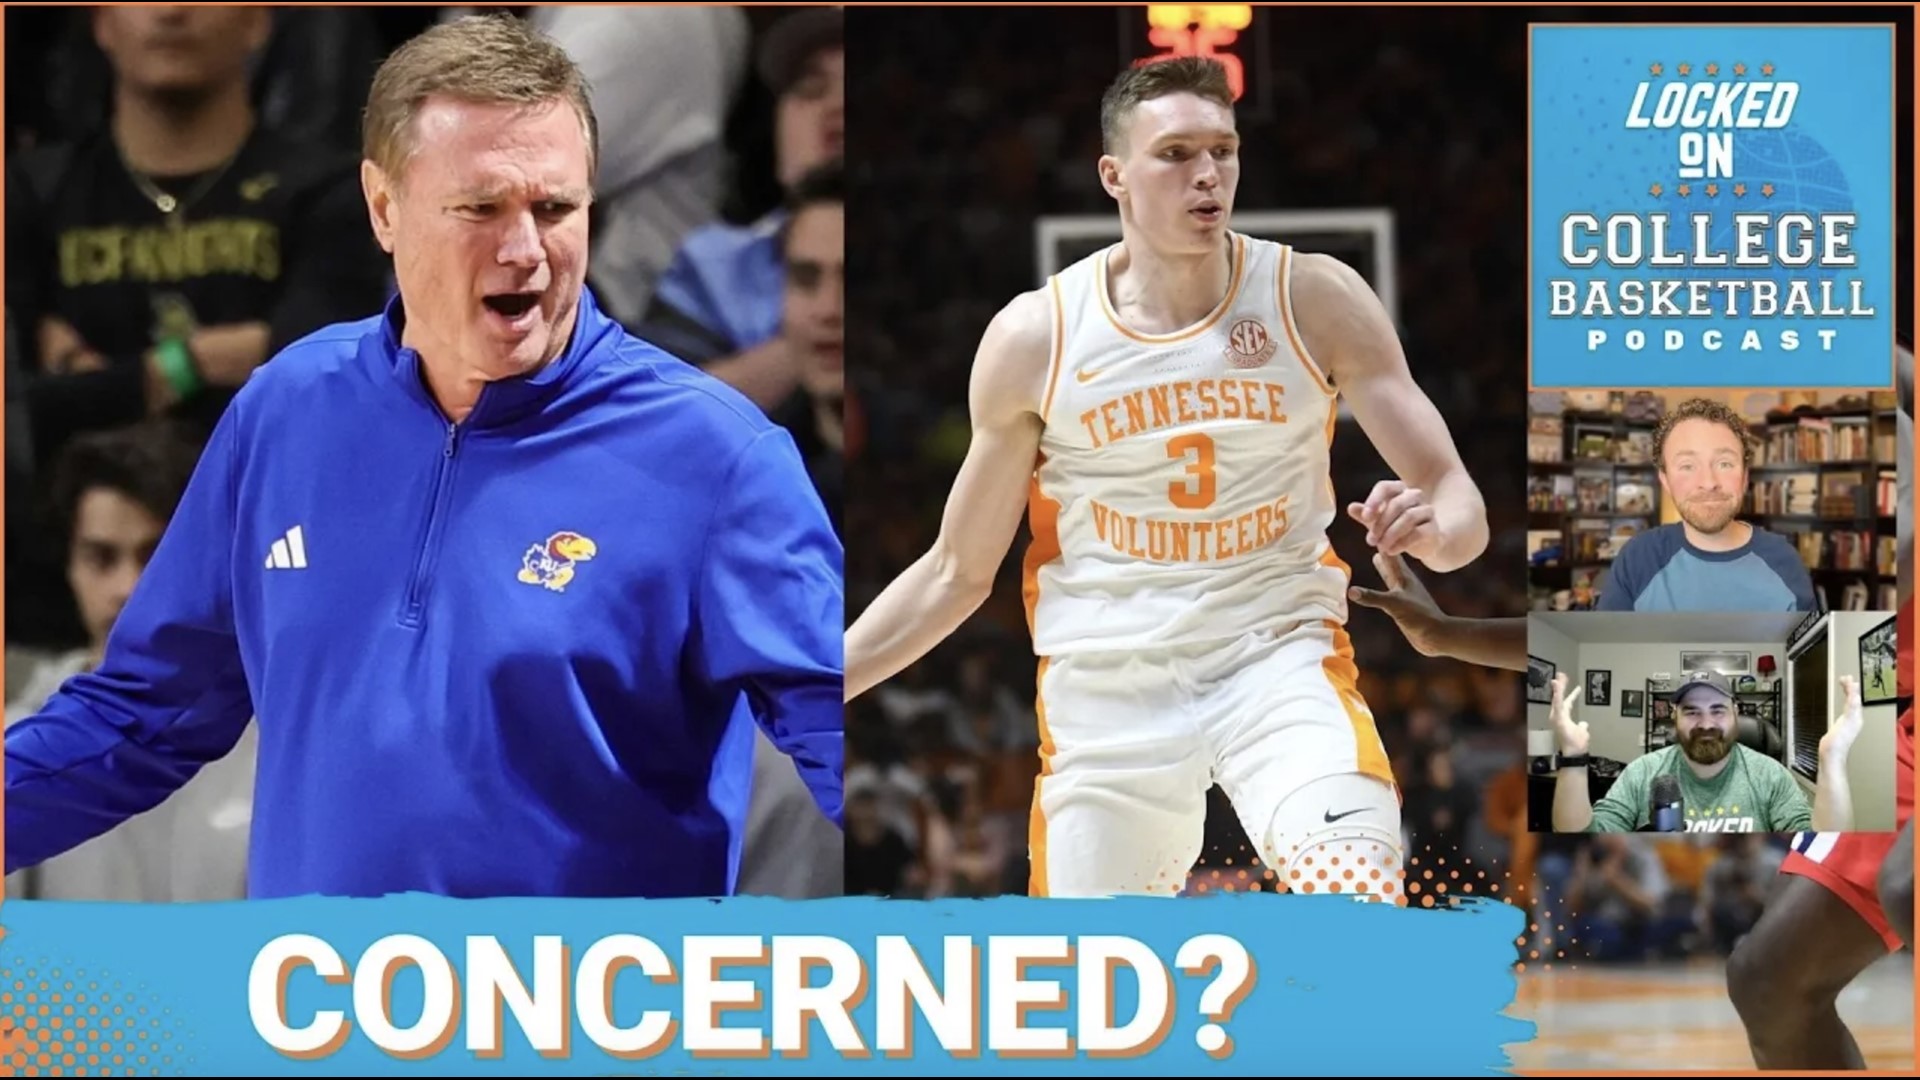 4 AP Top-5 teams have lost this week - Purdue, Houston, Kansas, and Tenenessee. Which one are we most concerned about?